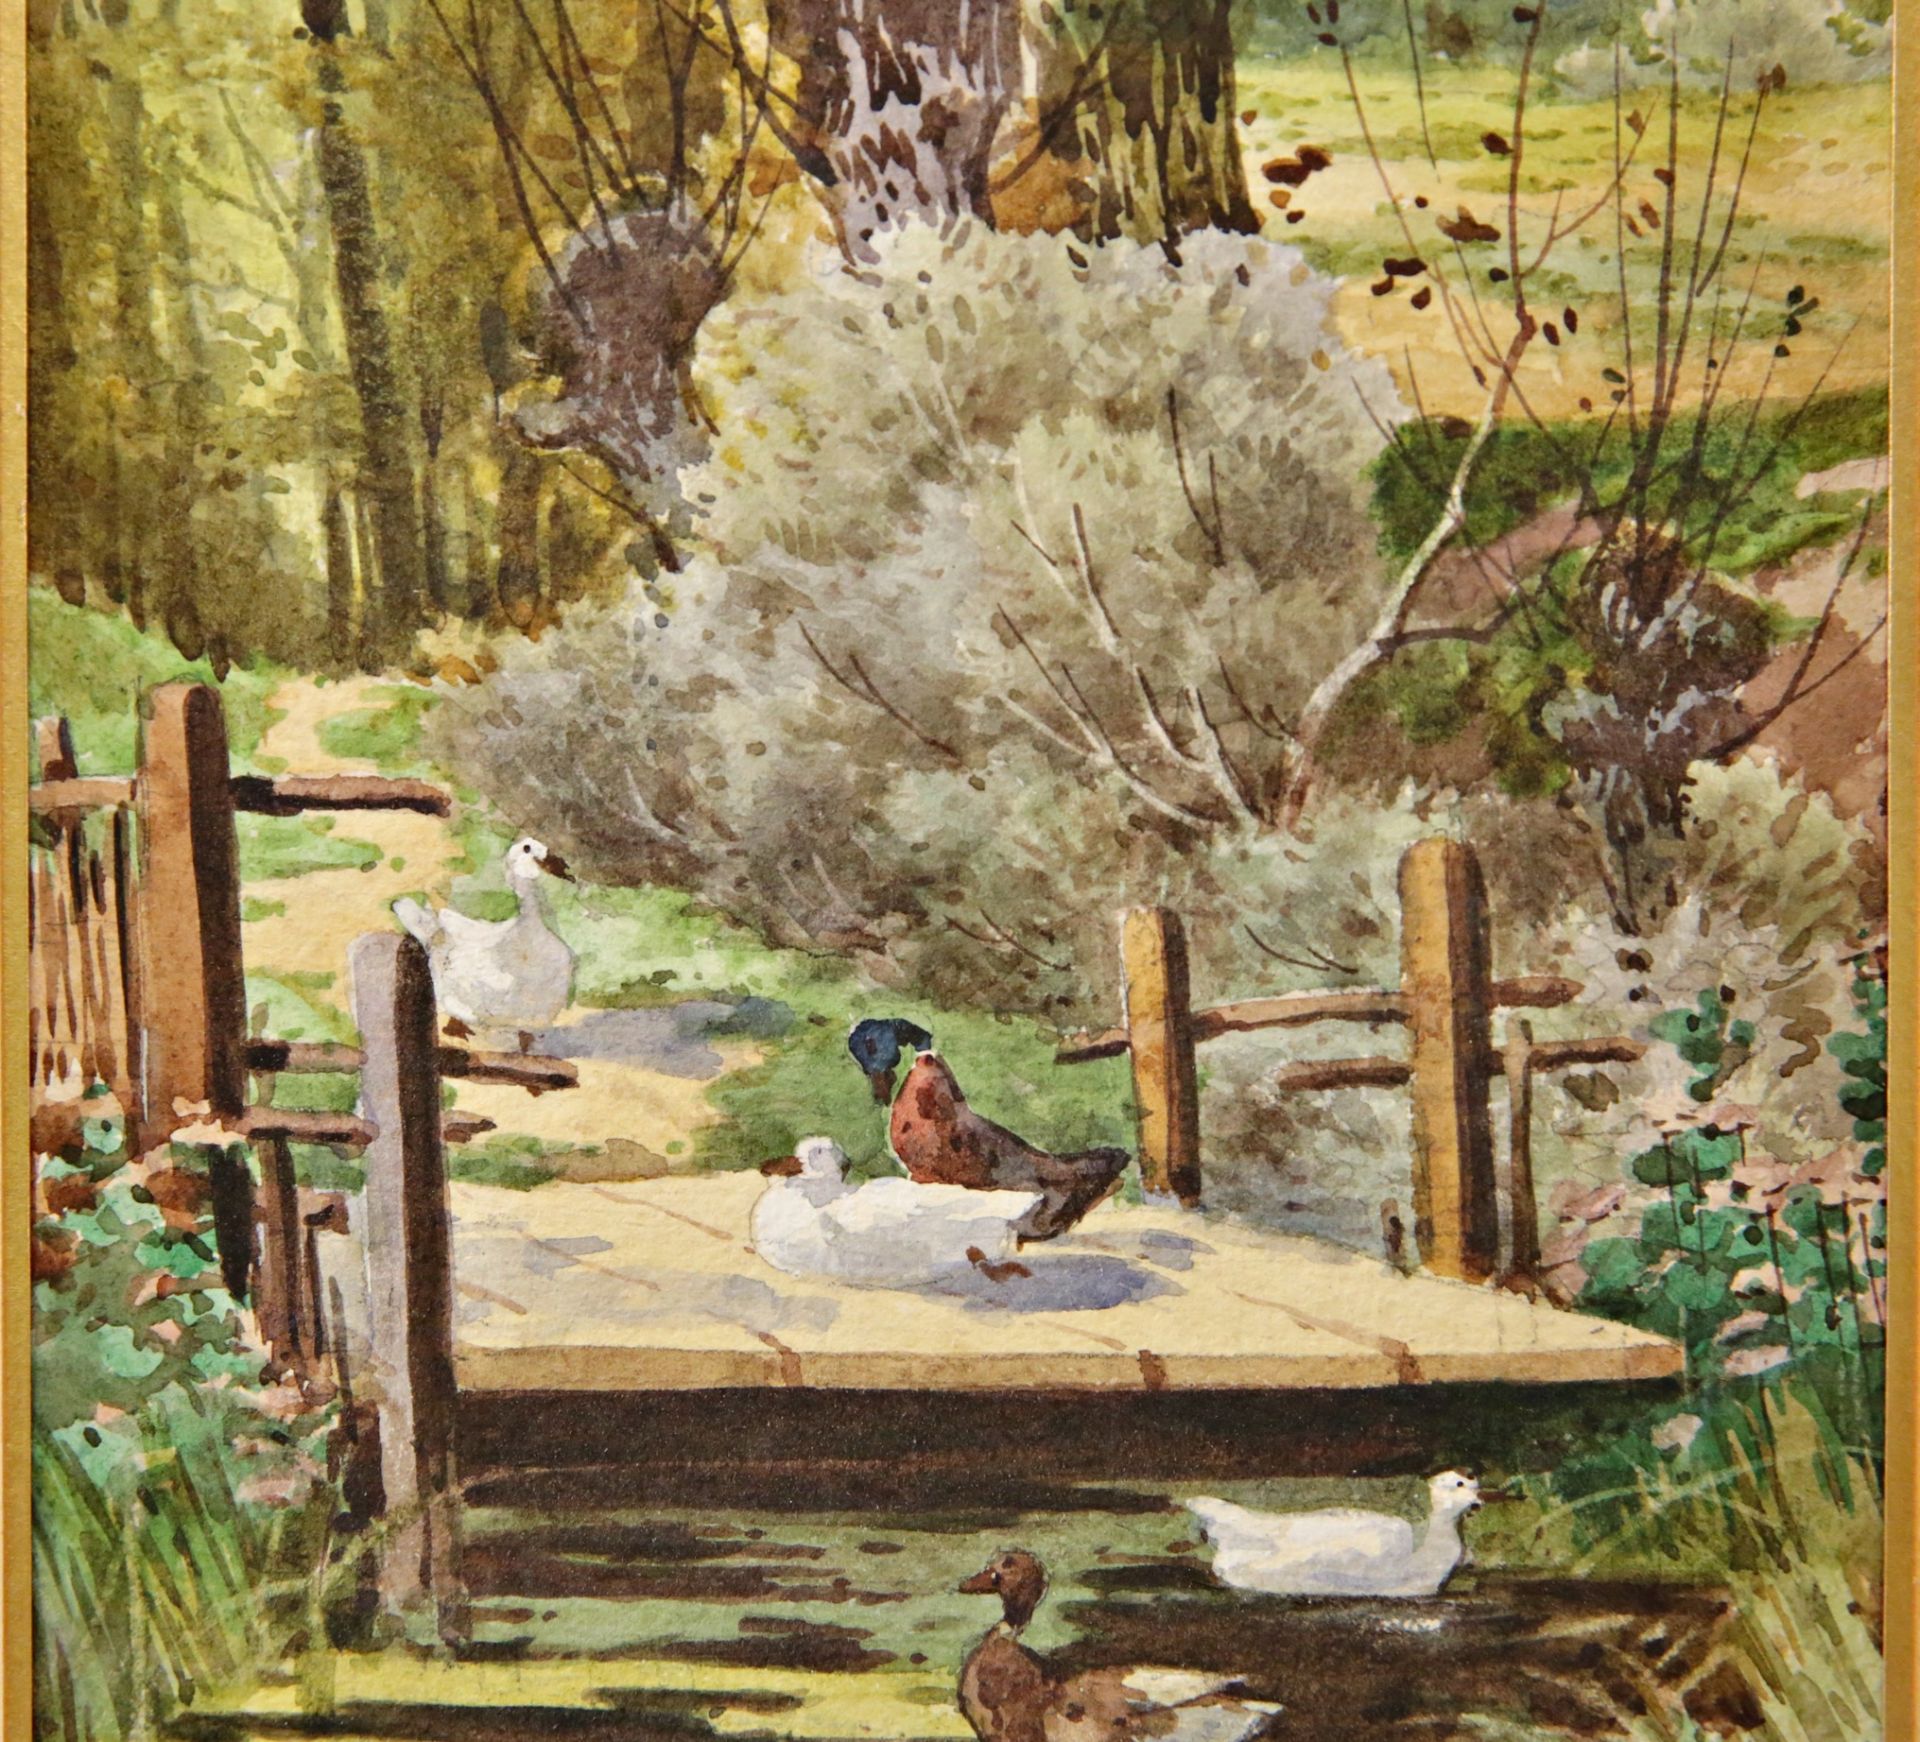 Jules RICHARD (XIX-XX) "A duck pontoon", watercolor on paper, French painting of the 19th-20th centu - Image 4 of 6